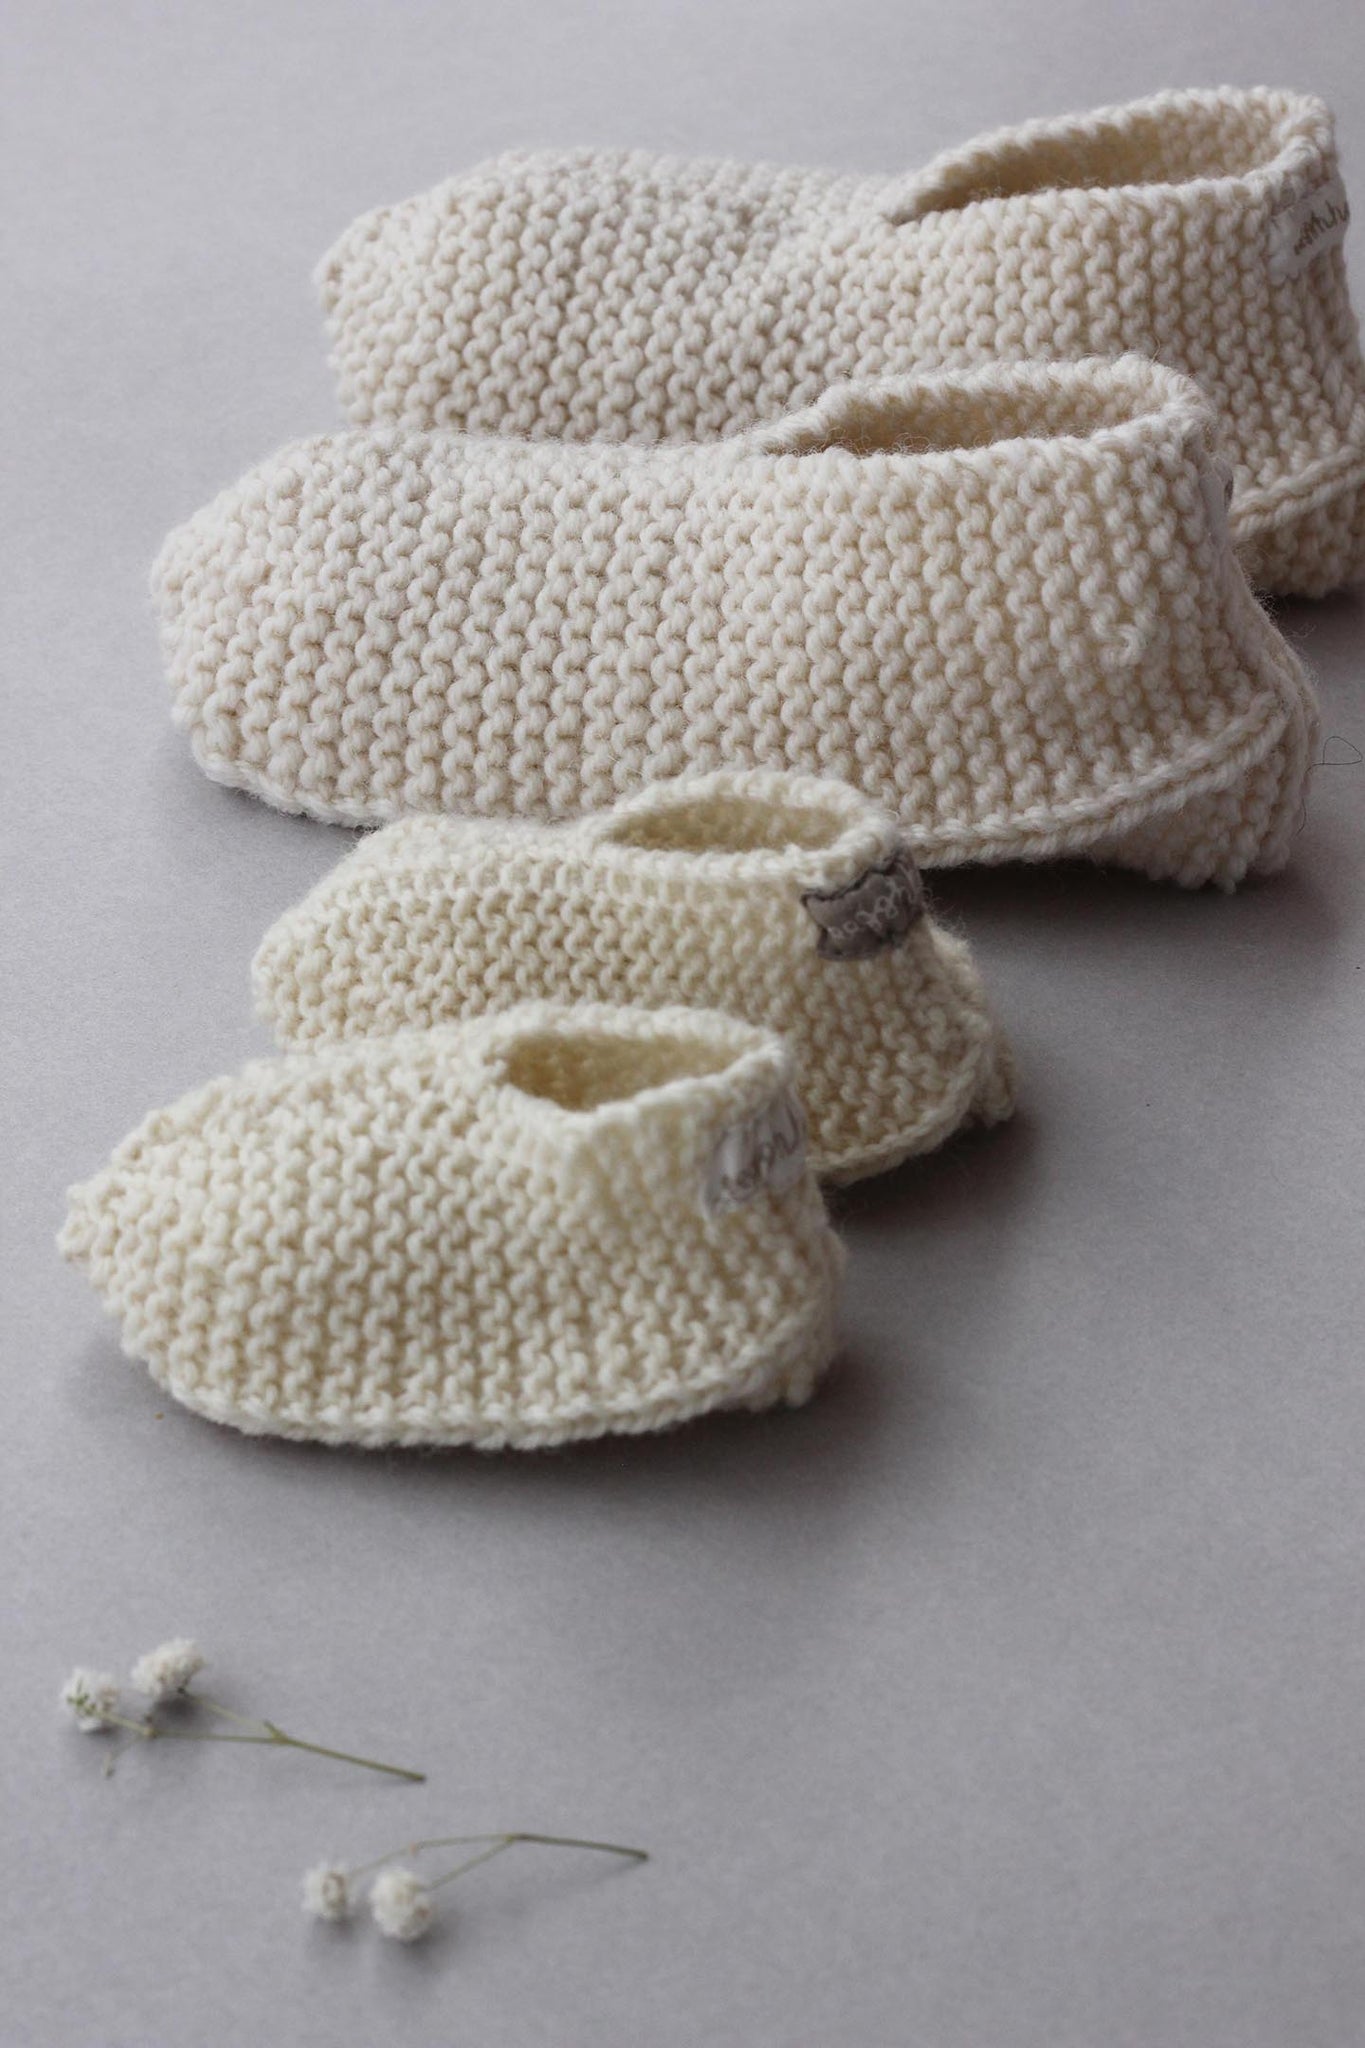 Vintage Mommy Baby Pure Merino Wool Booties - New Mommy & Baby Care Bundle - Set of 2 Booties